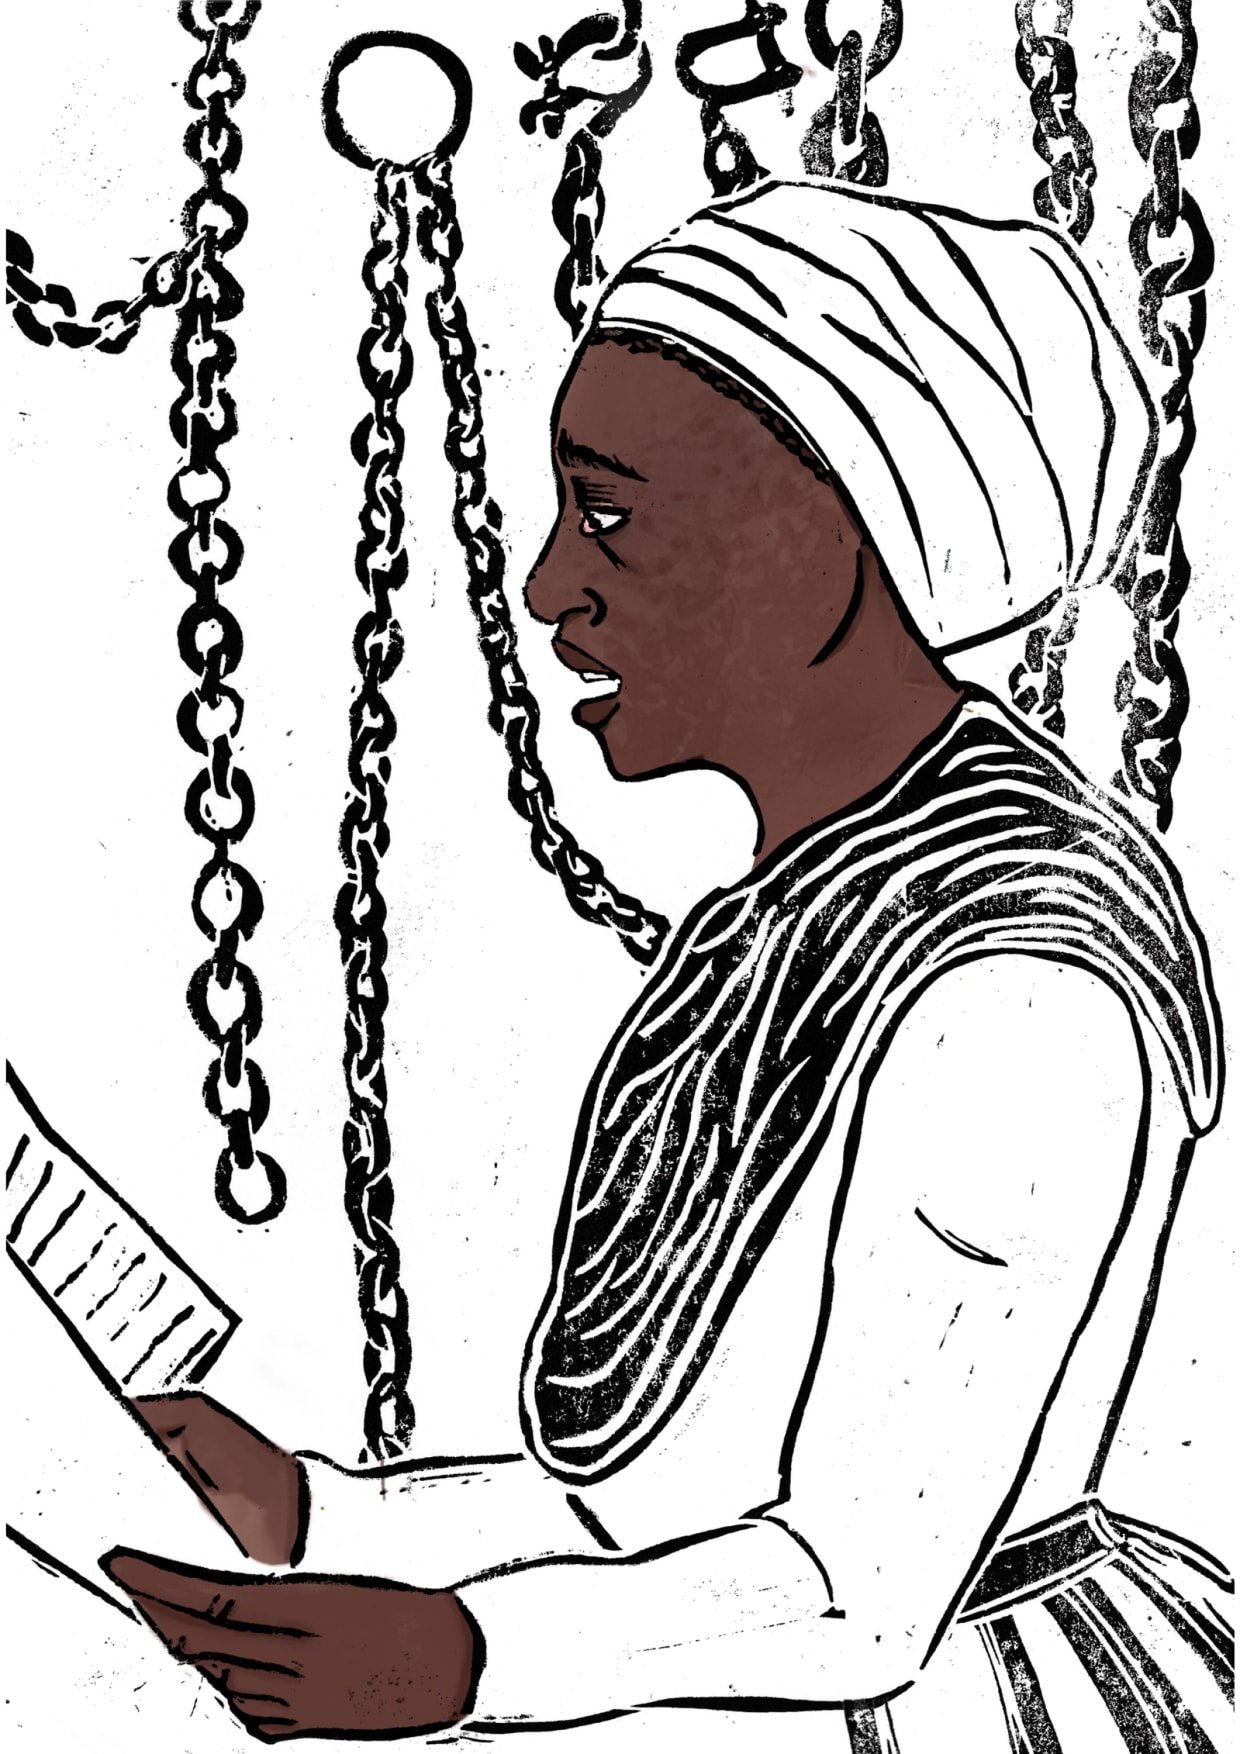 Lino print. The print depicts a Black woman wearing a headscarf, shawl, long sleeved shirt and skirt reading from a double-page manuscript. Her skin is brown, but the rest of the print is in black and white. Behind her, in the background, there are chains hanging from above which, in combination with the sullen look on the woman’s face, create a dark and oppressive atmosphere.